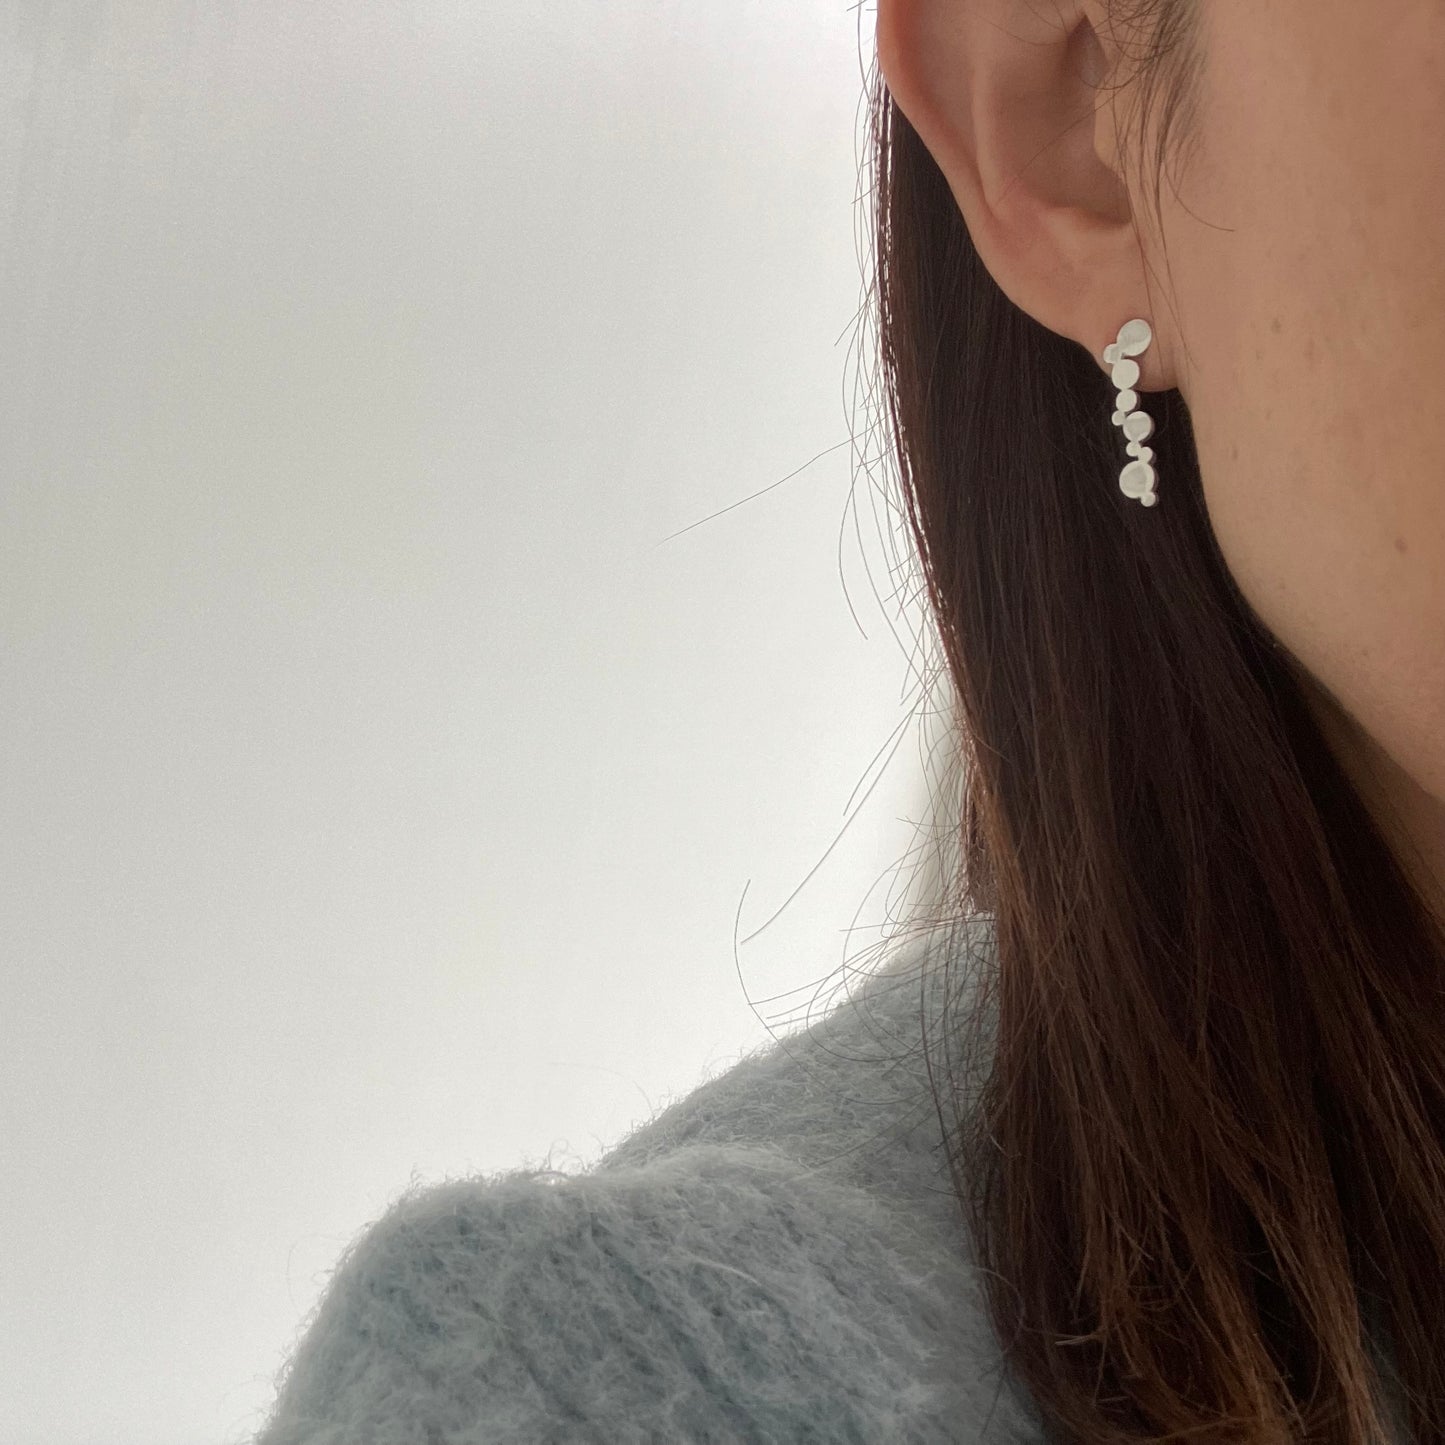 Medium Matte Finished Sterling Silver925 Bubble / Shower Stud Earring For Women シルバー バブルシャワー フロート 片耳ピアス